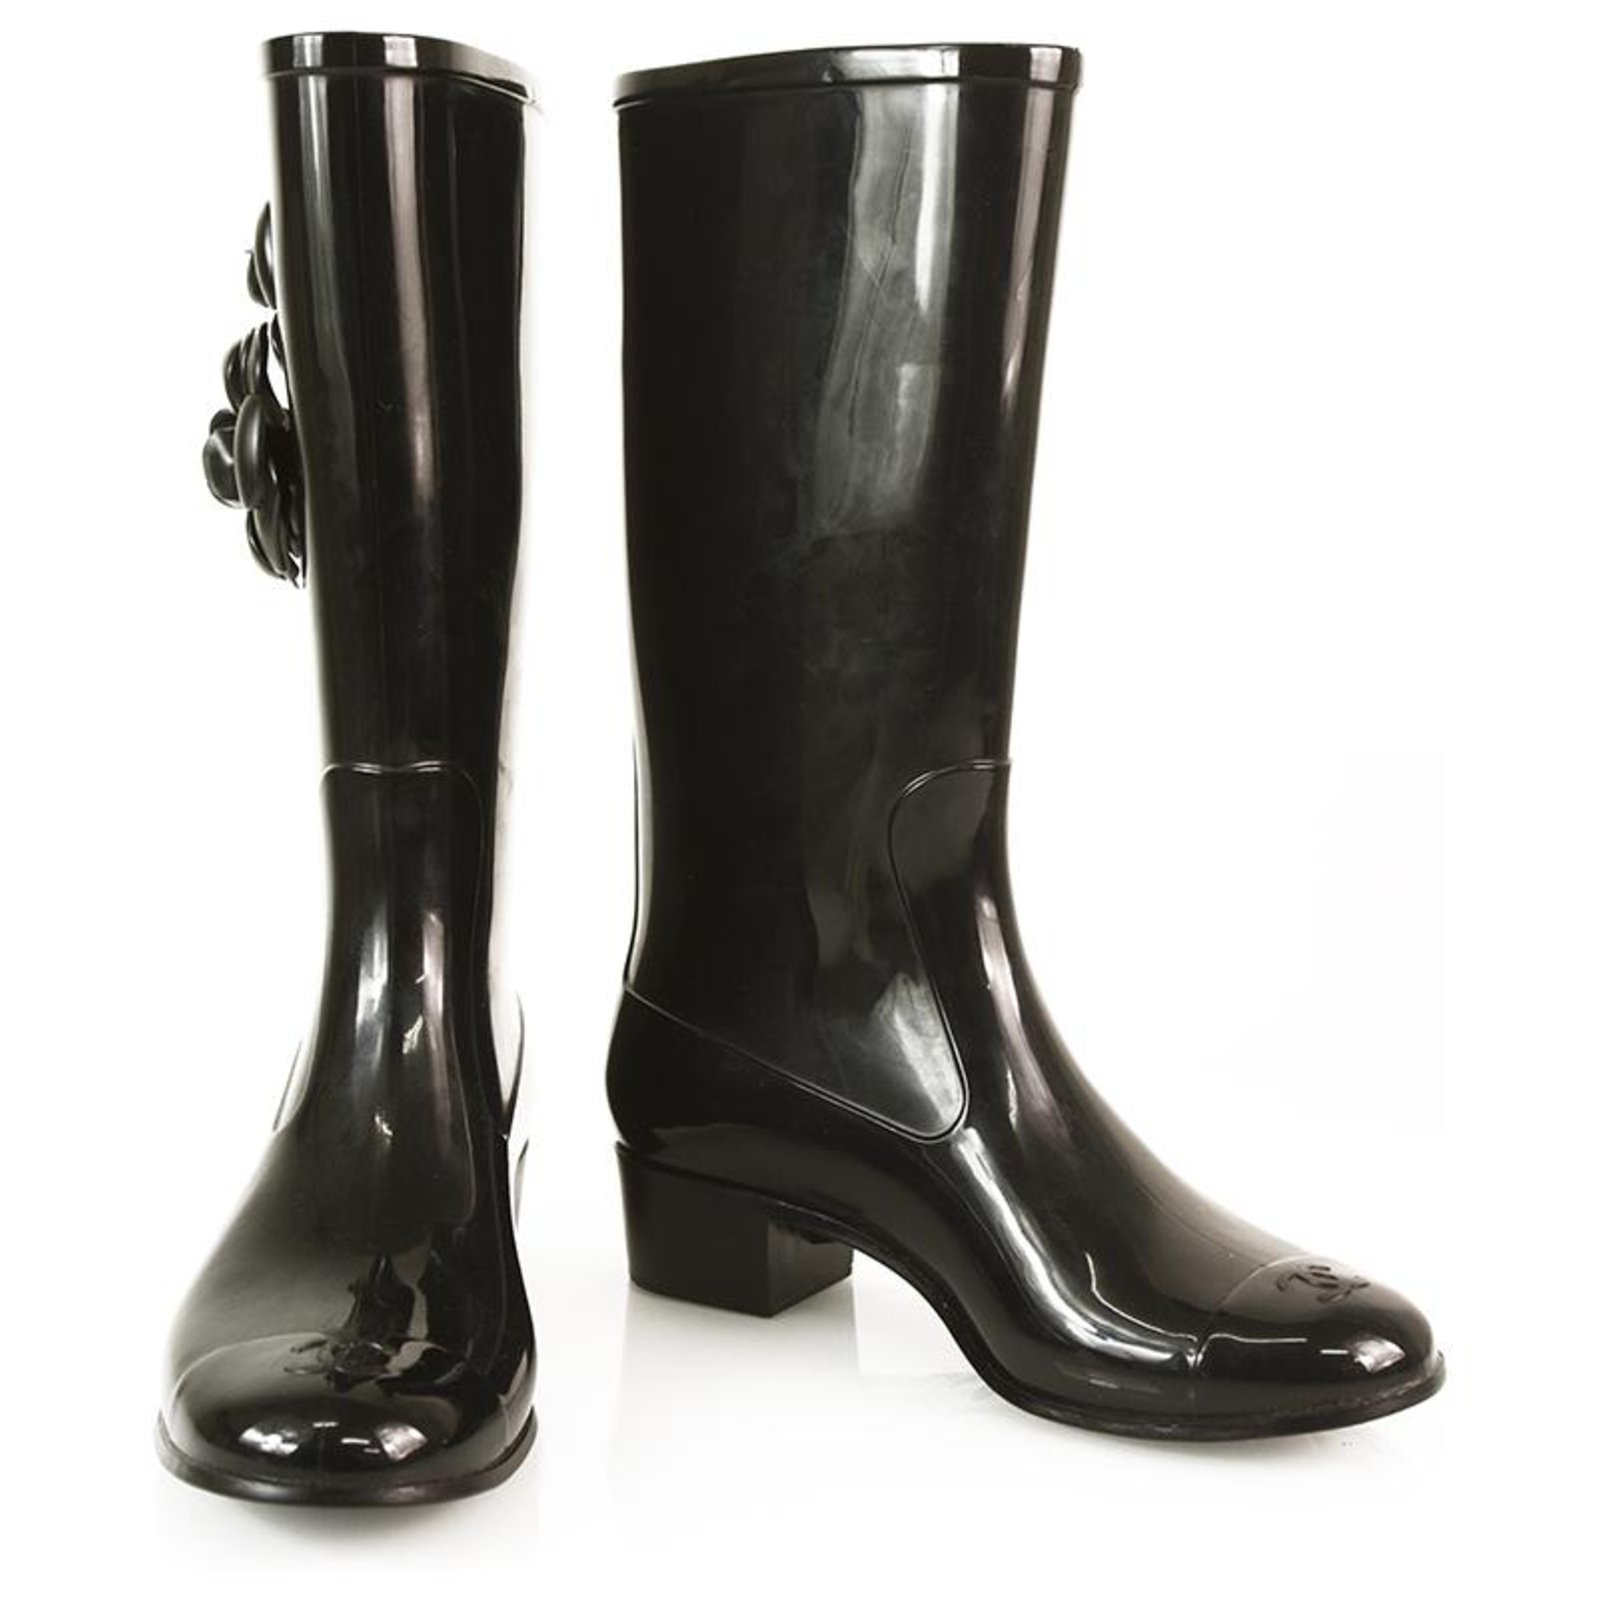 Chanel Chanel Black Rain Boots with two 